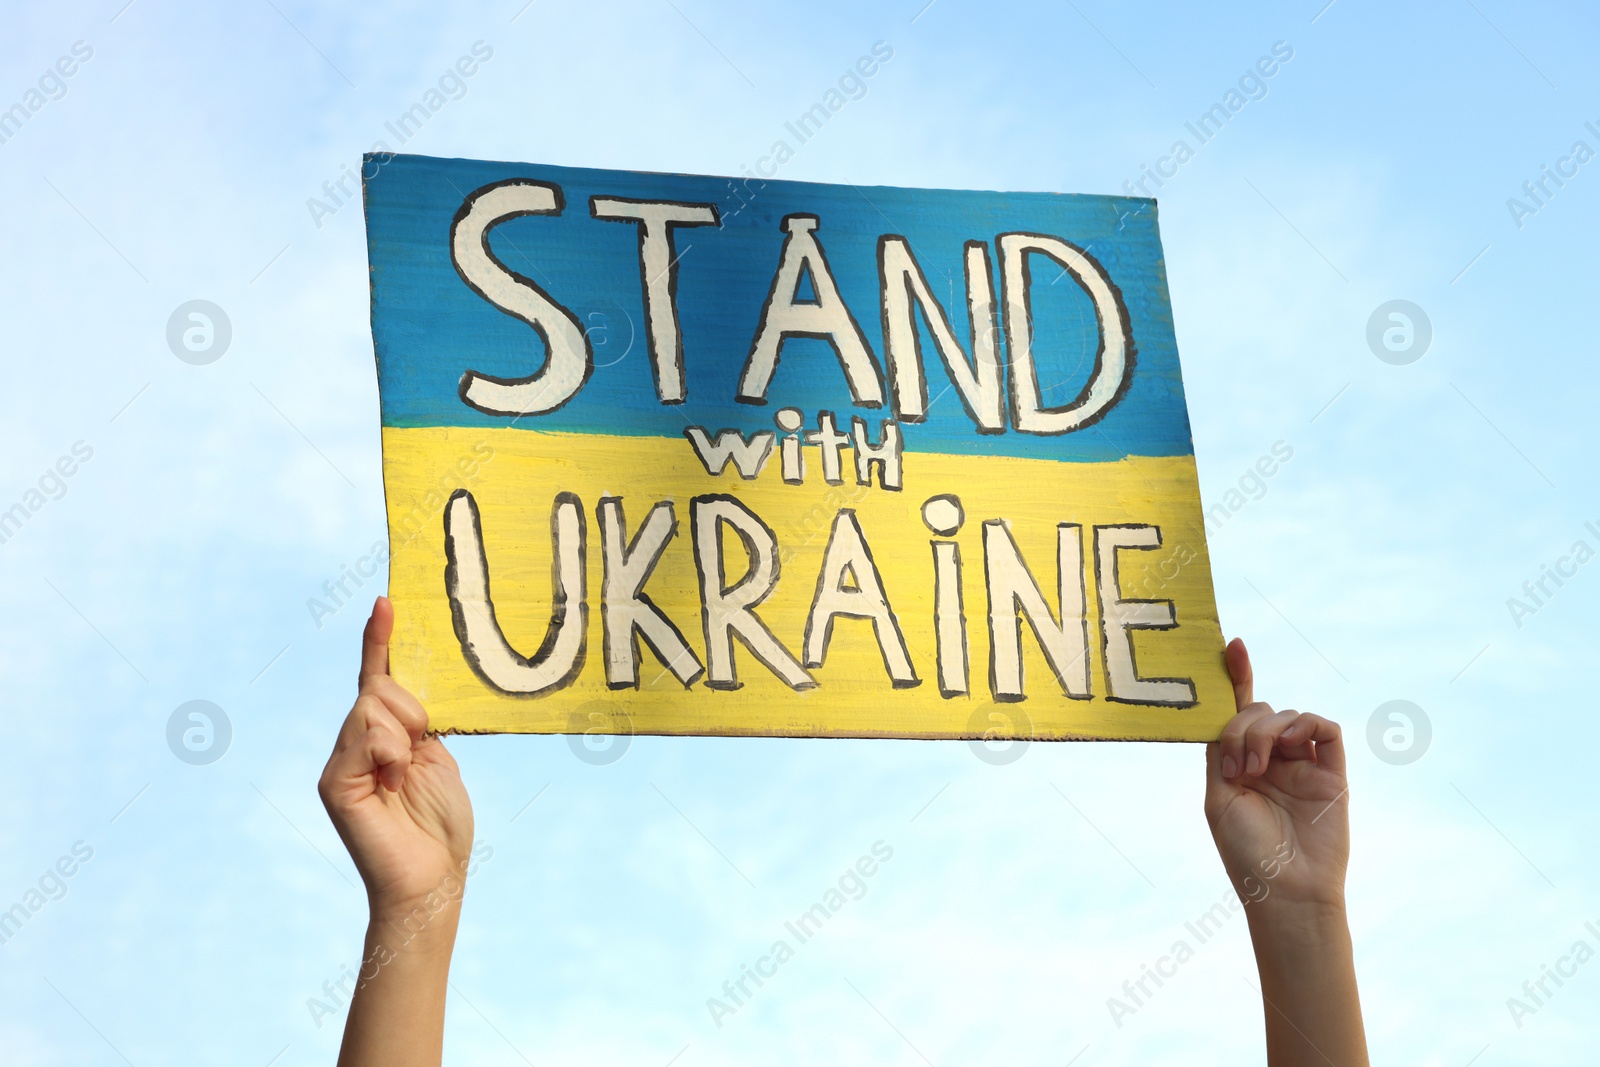 Photo of Woman holding poster Stand with Ukraine against blue sky, closeup